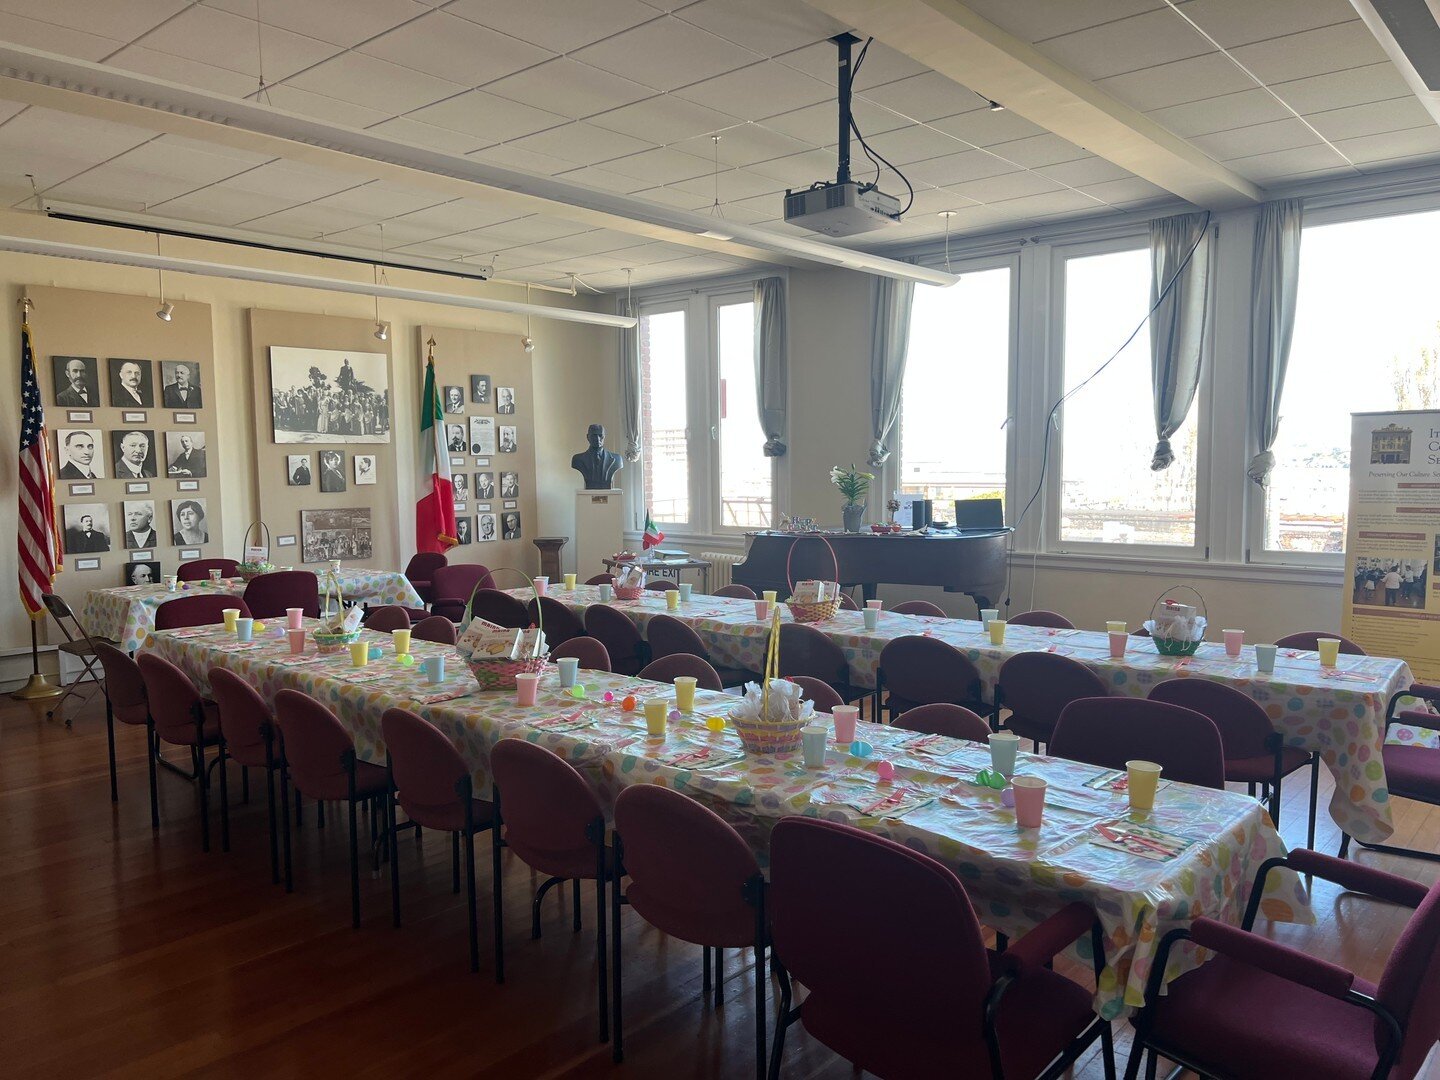 🐰✨Celebrate Easter with Italian Community Services (ICS)! 🌷🥚
Please join us for our beloved annual Easter Luncheon on Wednesday, March 27th, at ICS's Italian Heritage Room. It's a wonderful opportunity to come together, share in delicious food, an